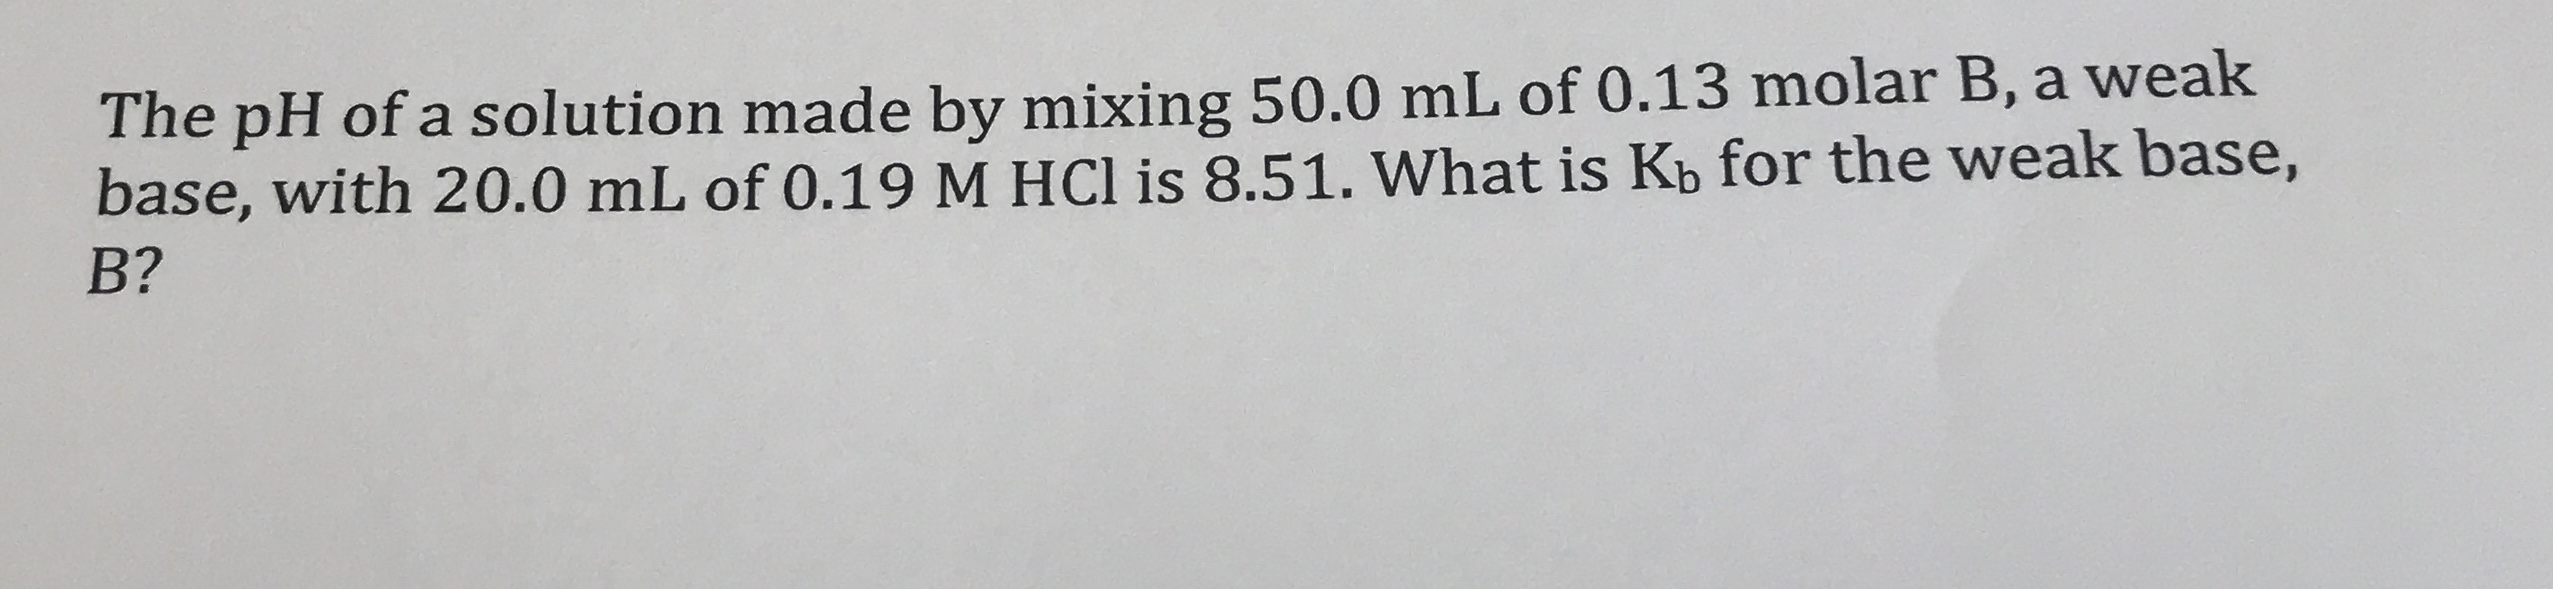 The pH of a solution made by mixing 50.0 mL of 0.13 molar B, a weak
base, with 20.0 mL of 0.19 M HCl is 8.51. What is Kb for the weak base,
B?
